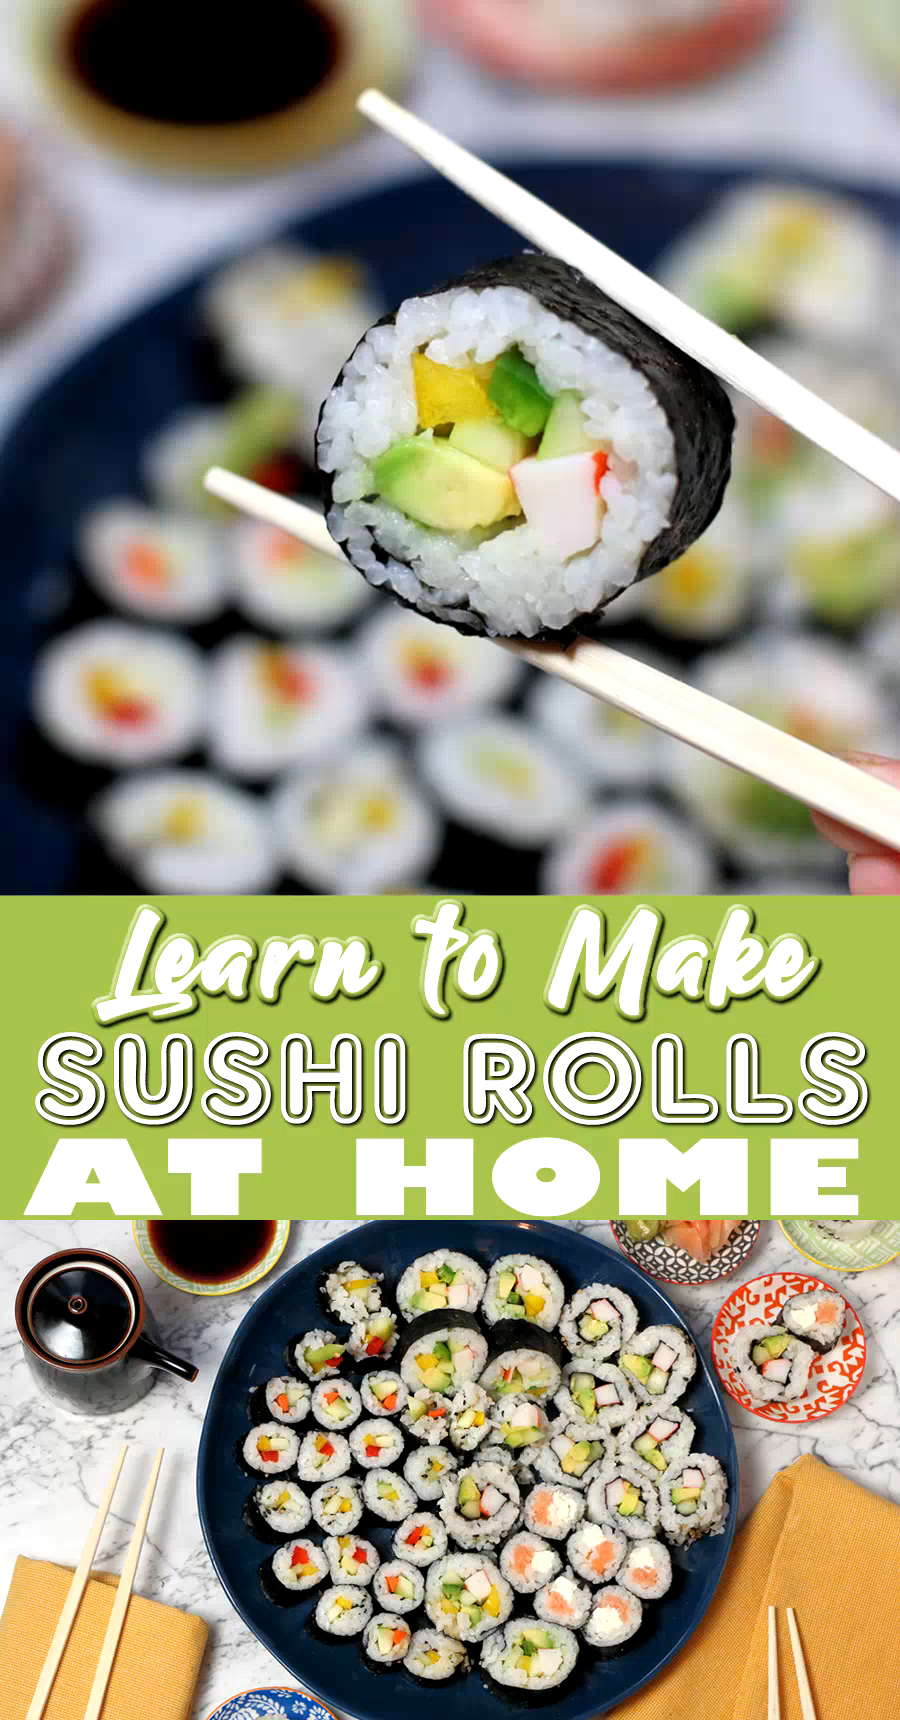 Making Sushi Rolls For Your Holiday Party Is Easy! Here's How! - Making Sushi Rolls For Your Holiday Party Is Easy! Here's How! -   17 diy Food step by step ideas